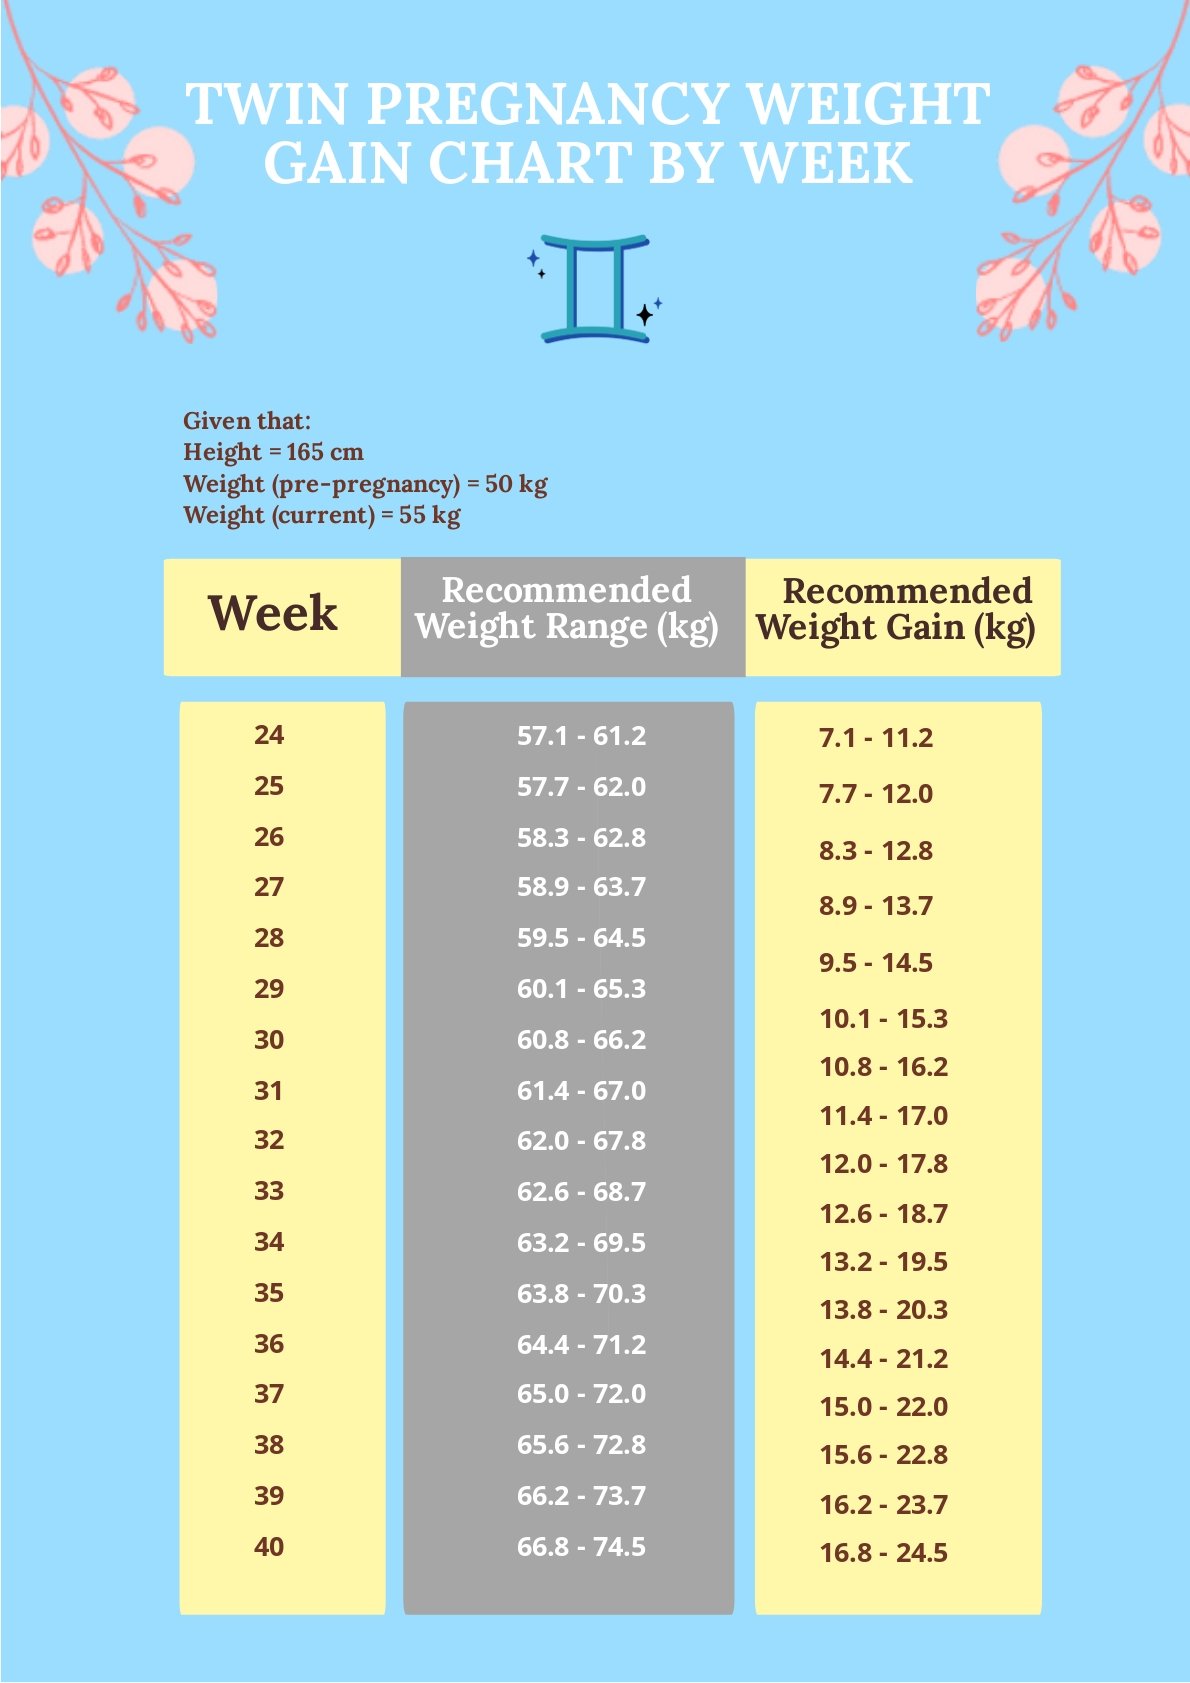 Twin Pregnancy Weight Gain Chart By Week in Word, PSD Download